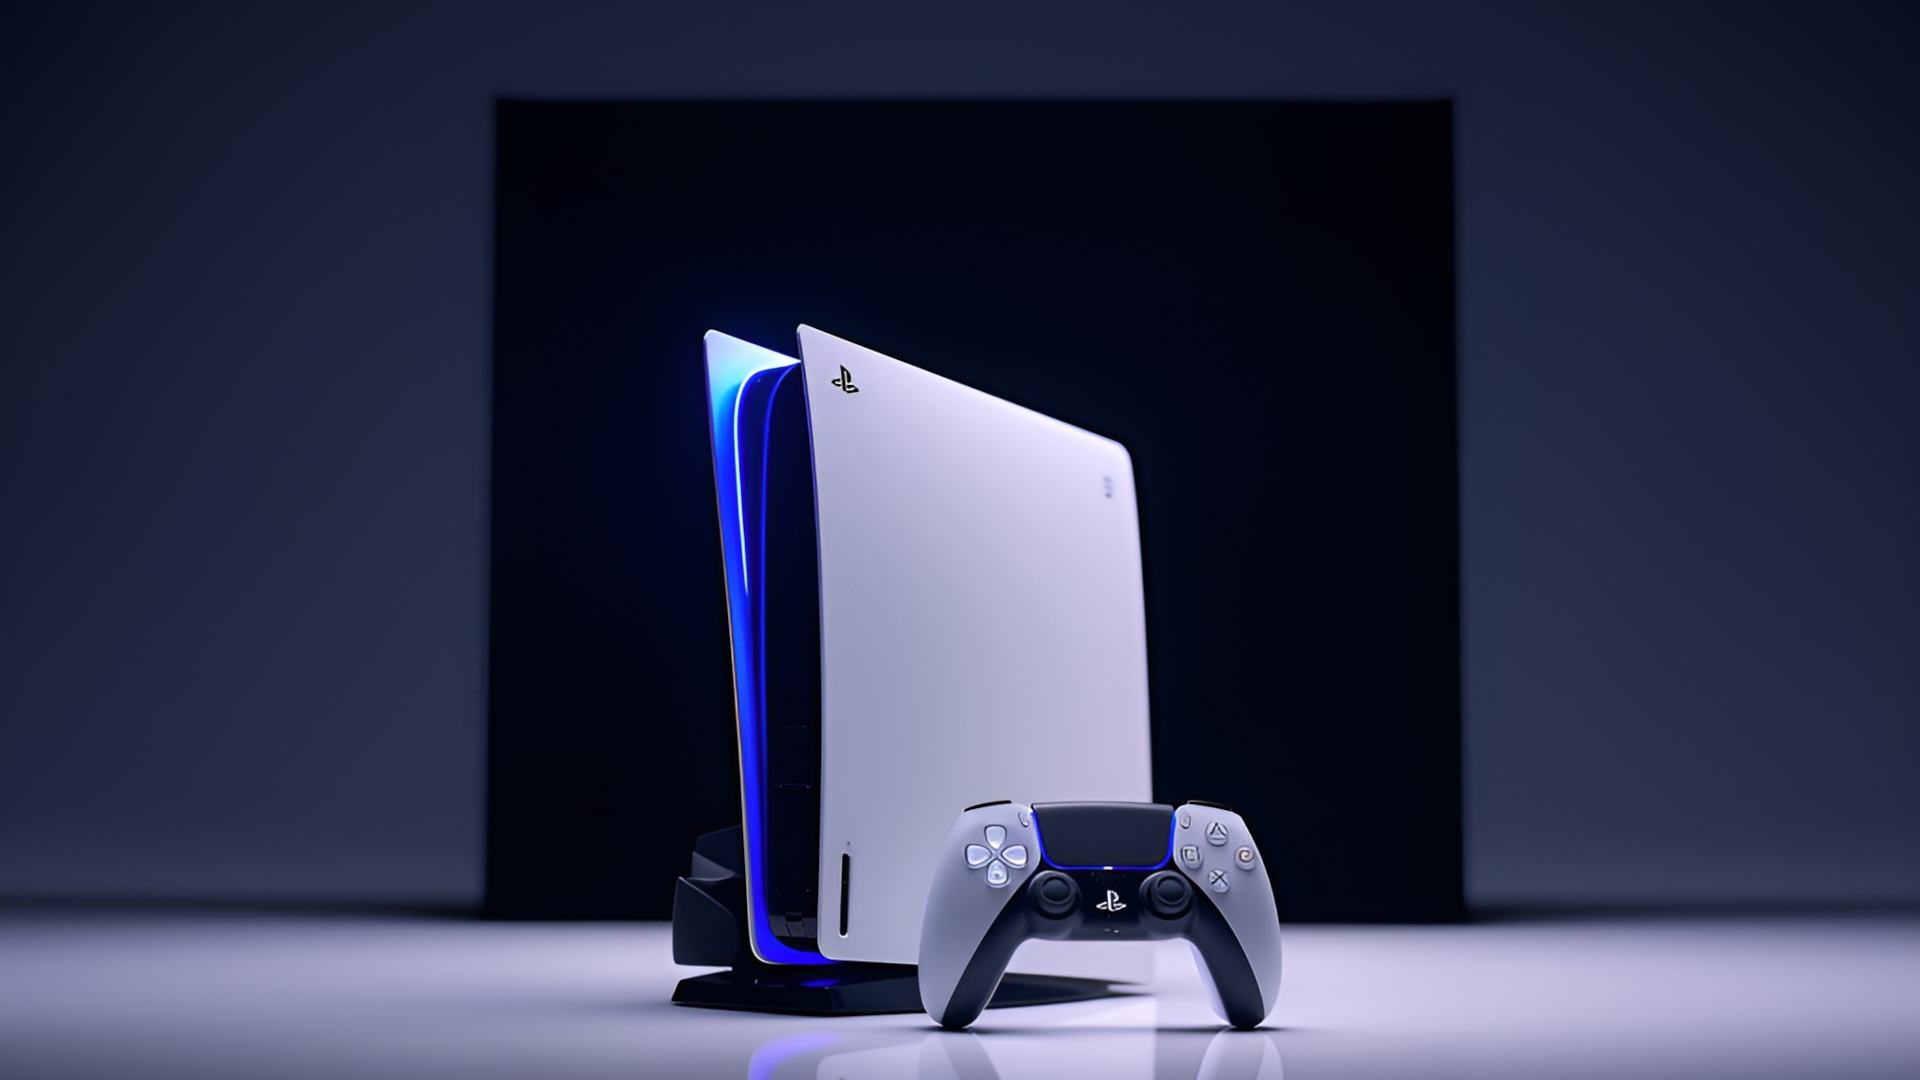 Oddly-shaped PlayStation 5 Pro concept emphasizes VR immersion for